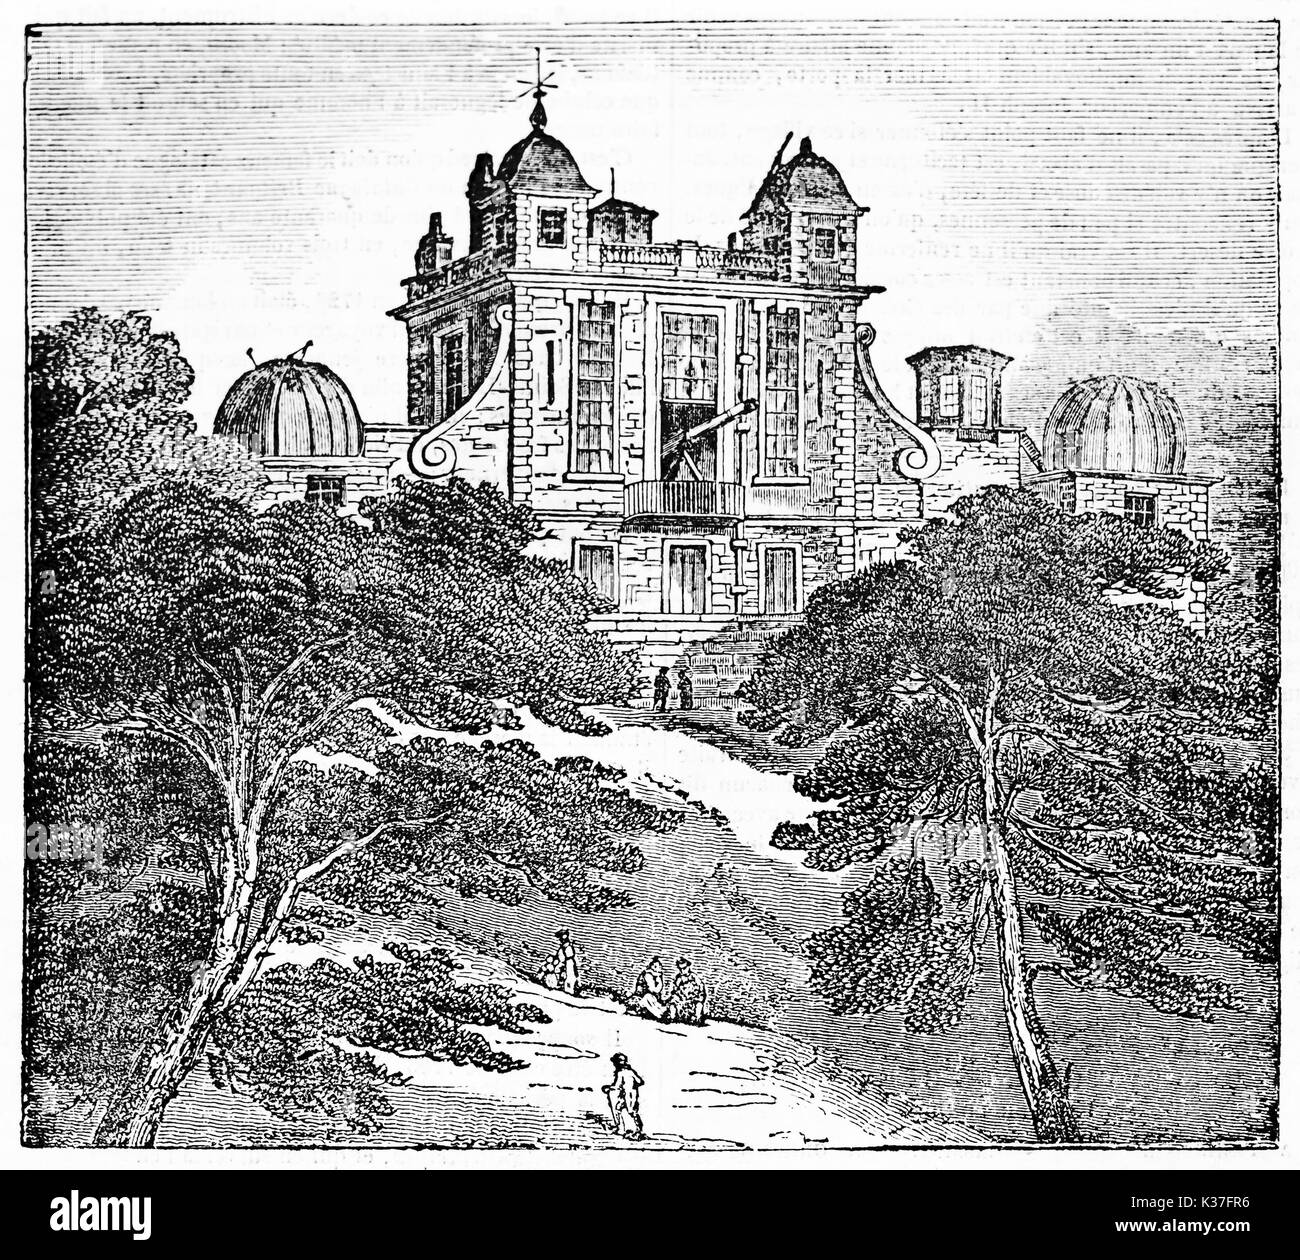 Ancient suggestive view of Royal observatory Greenwich (Flamsteed house) London, surrounded by nature and trees. Old Illustration by unidentified author published on Magasin Pittoresque Paris 1834 Stock Photo